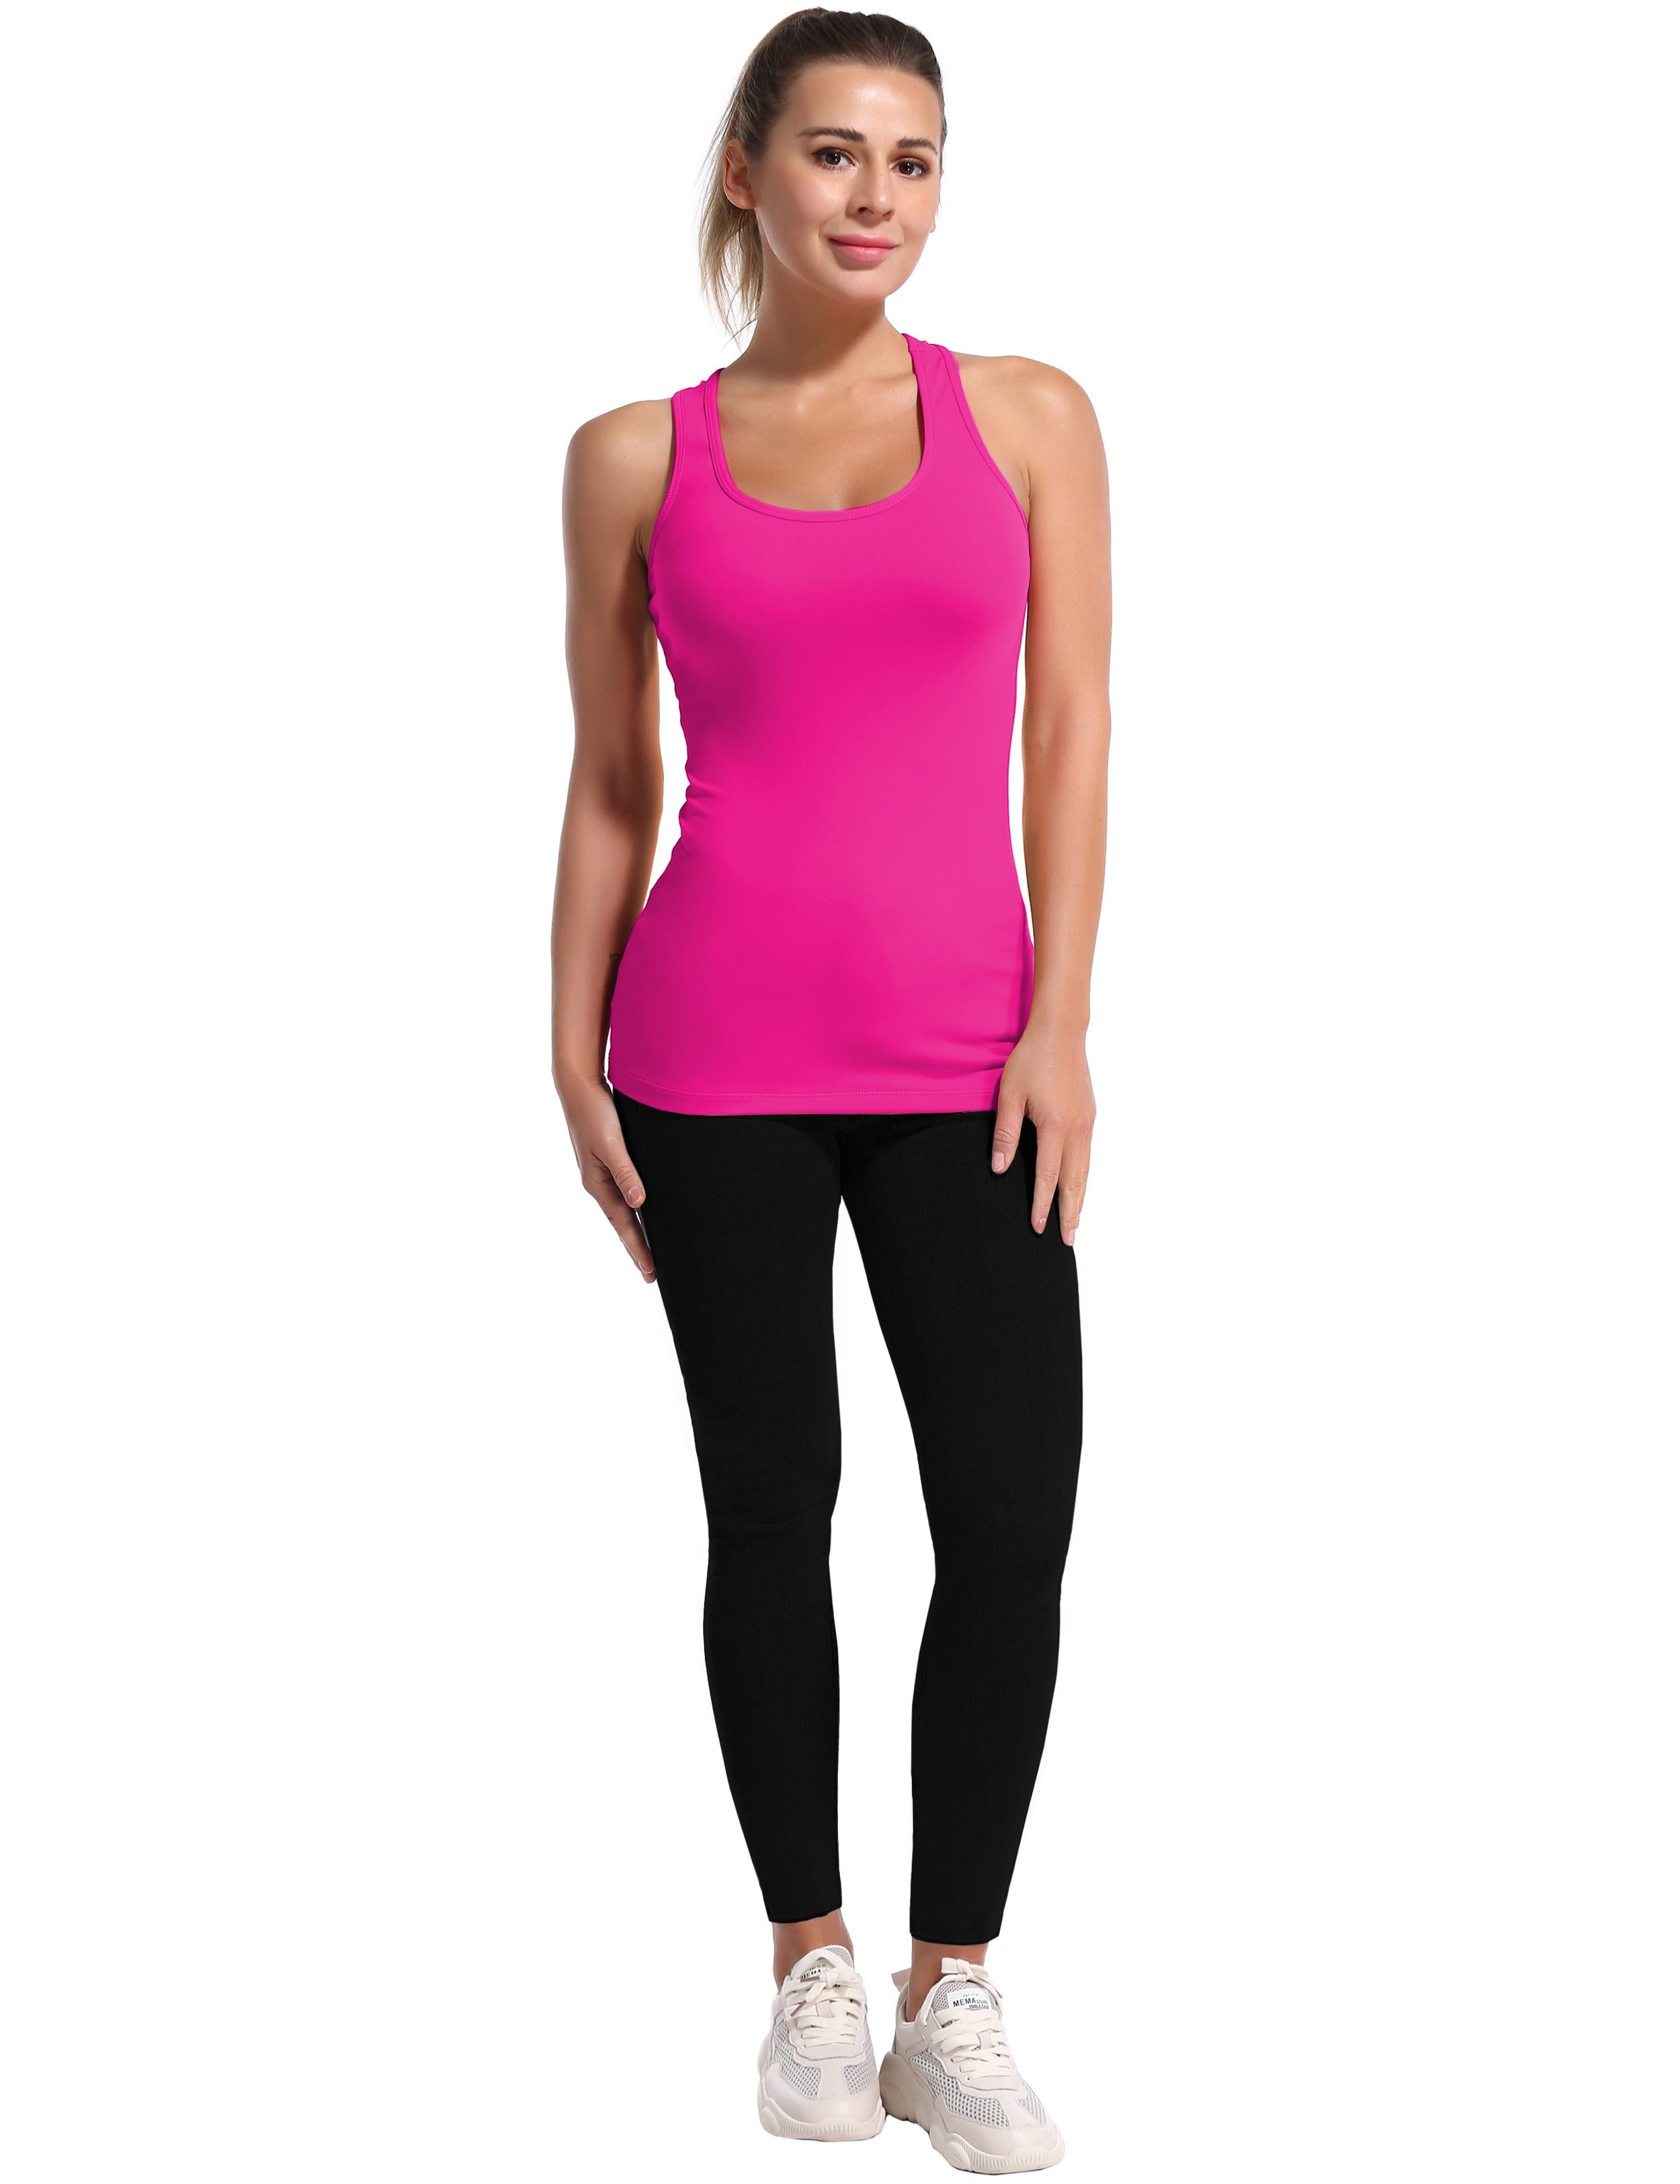 Racerback Athletic Tank Tops magenta 92%Nylon/8%Spandex(Cotton Soft) Designed for Pilates Tight Fit So buttery soft, it feels weightless Sweat-wicking Four-way stretch Breathable Contours your body Sits below the waistband for moderate, everyday coverage